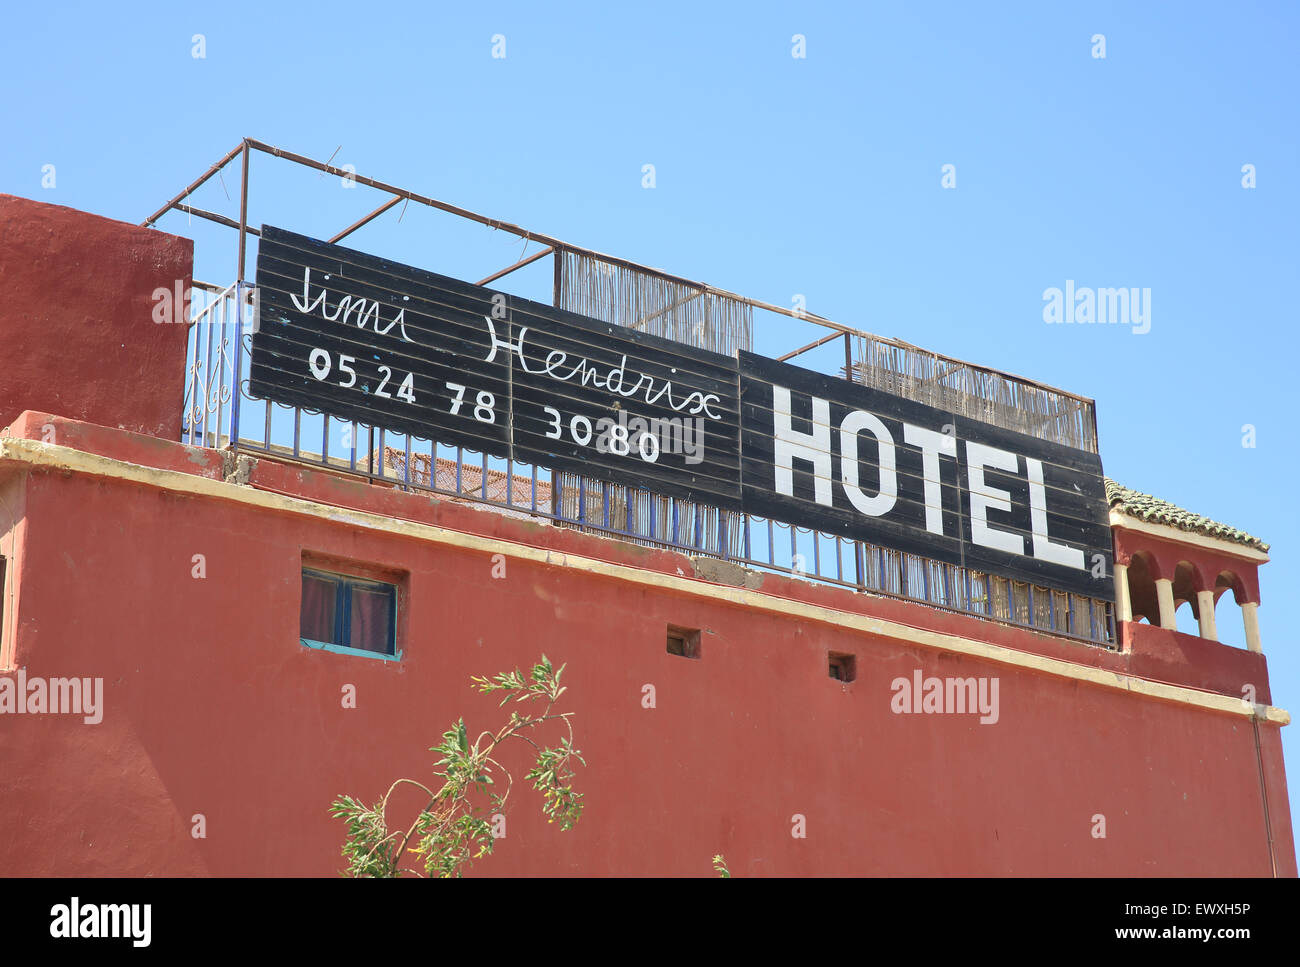 The hotel Jimi Hendrix in the small 60s hippy town of Diabat, near Essaouira, Morocco, North Africa Stock Photo